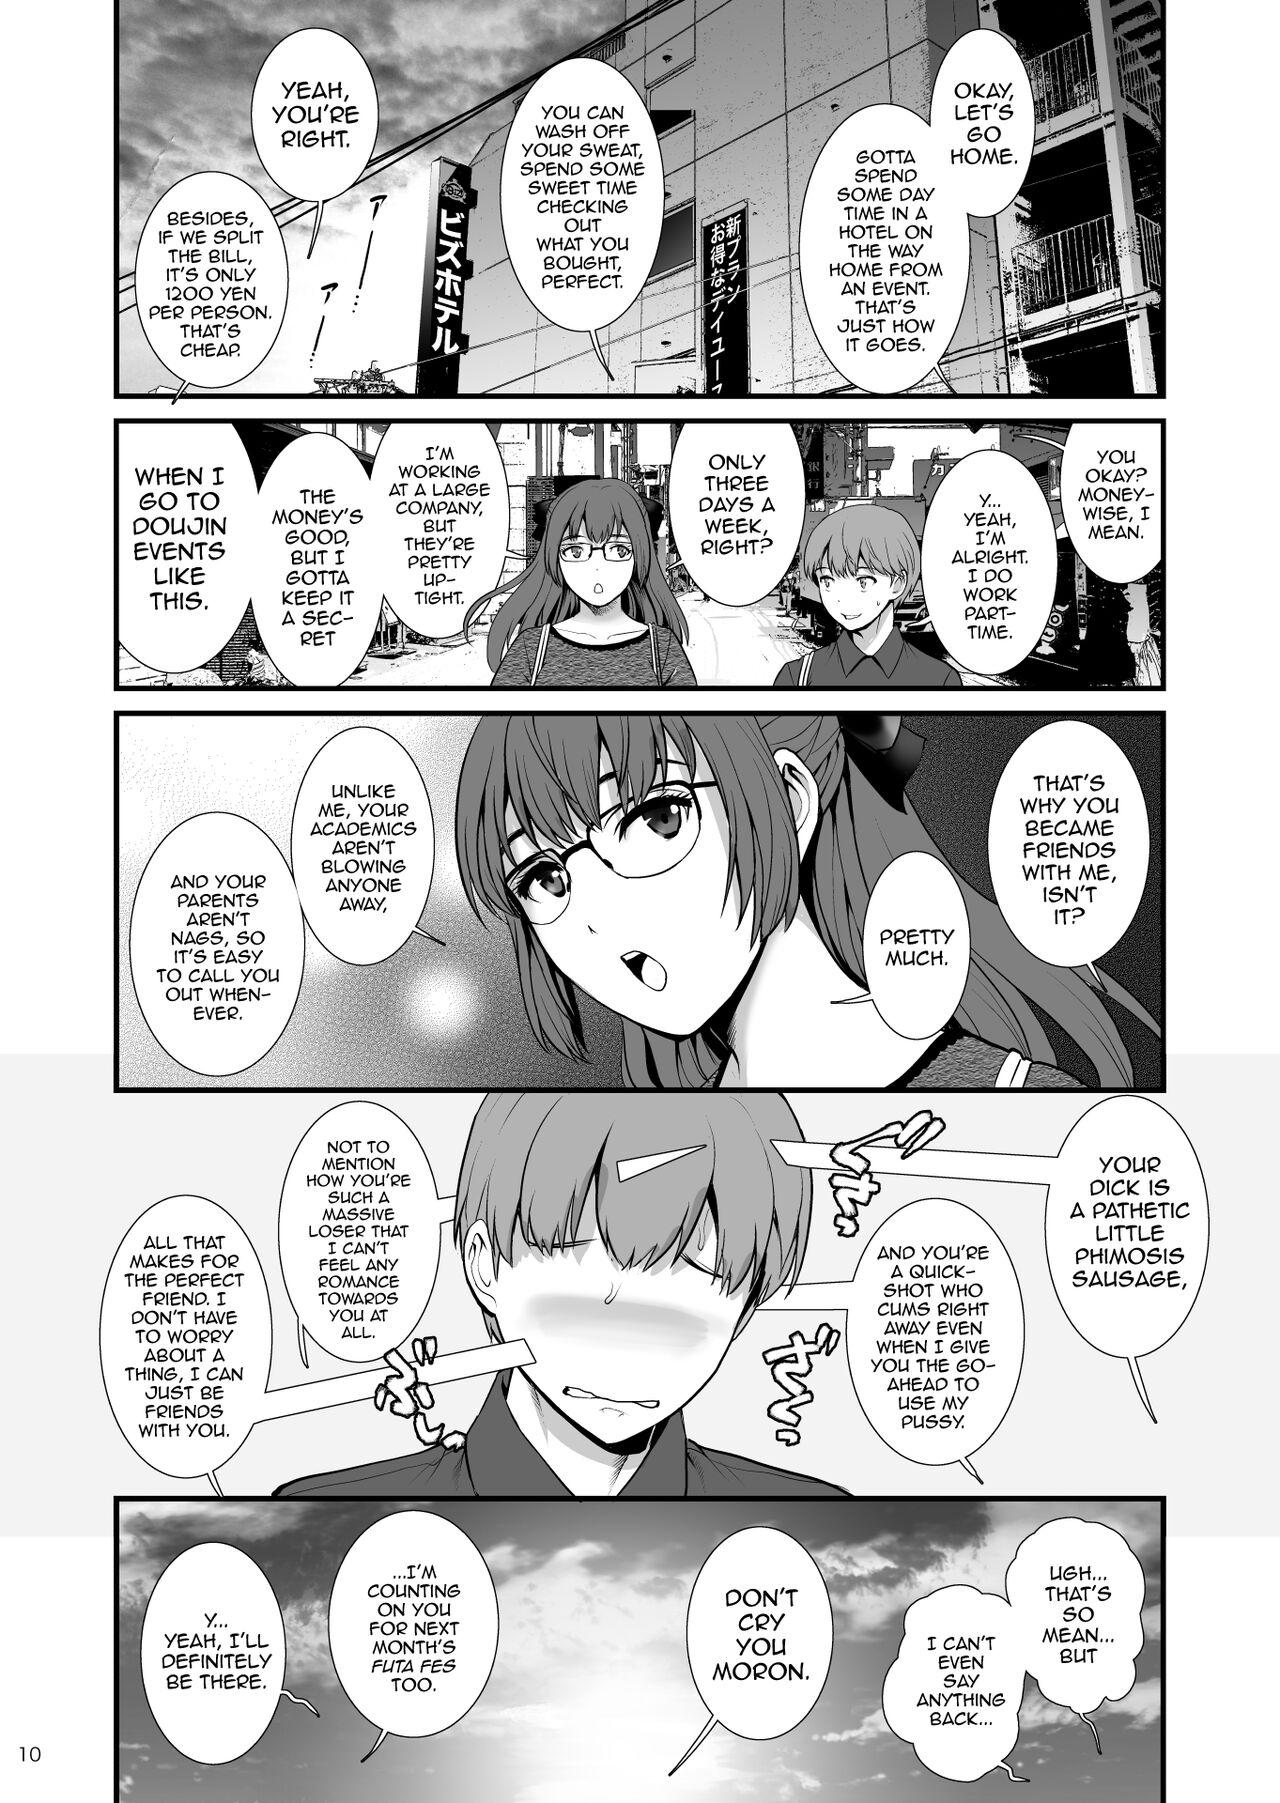 Crazy Jimiko Diary Four - Original Old Vs Young - Page 9